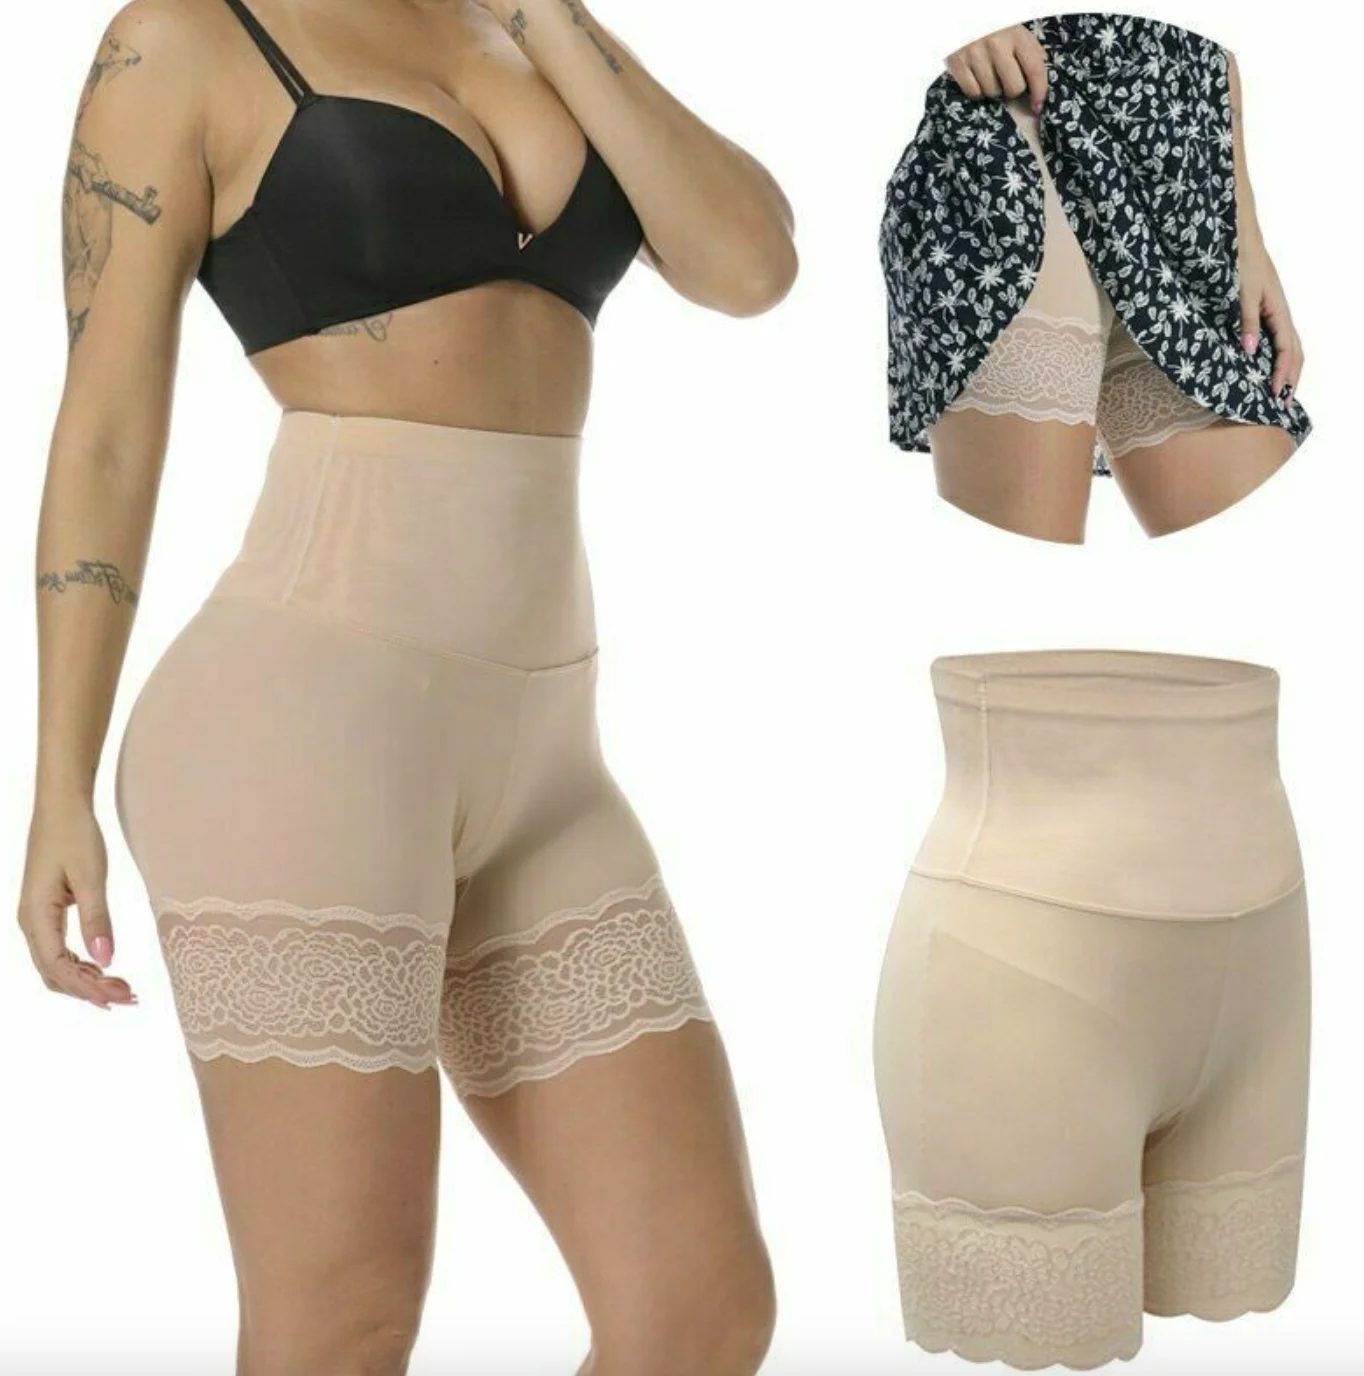 Slip Shorts for Under Dresses Knickers Underwear Anti-chafing